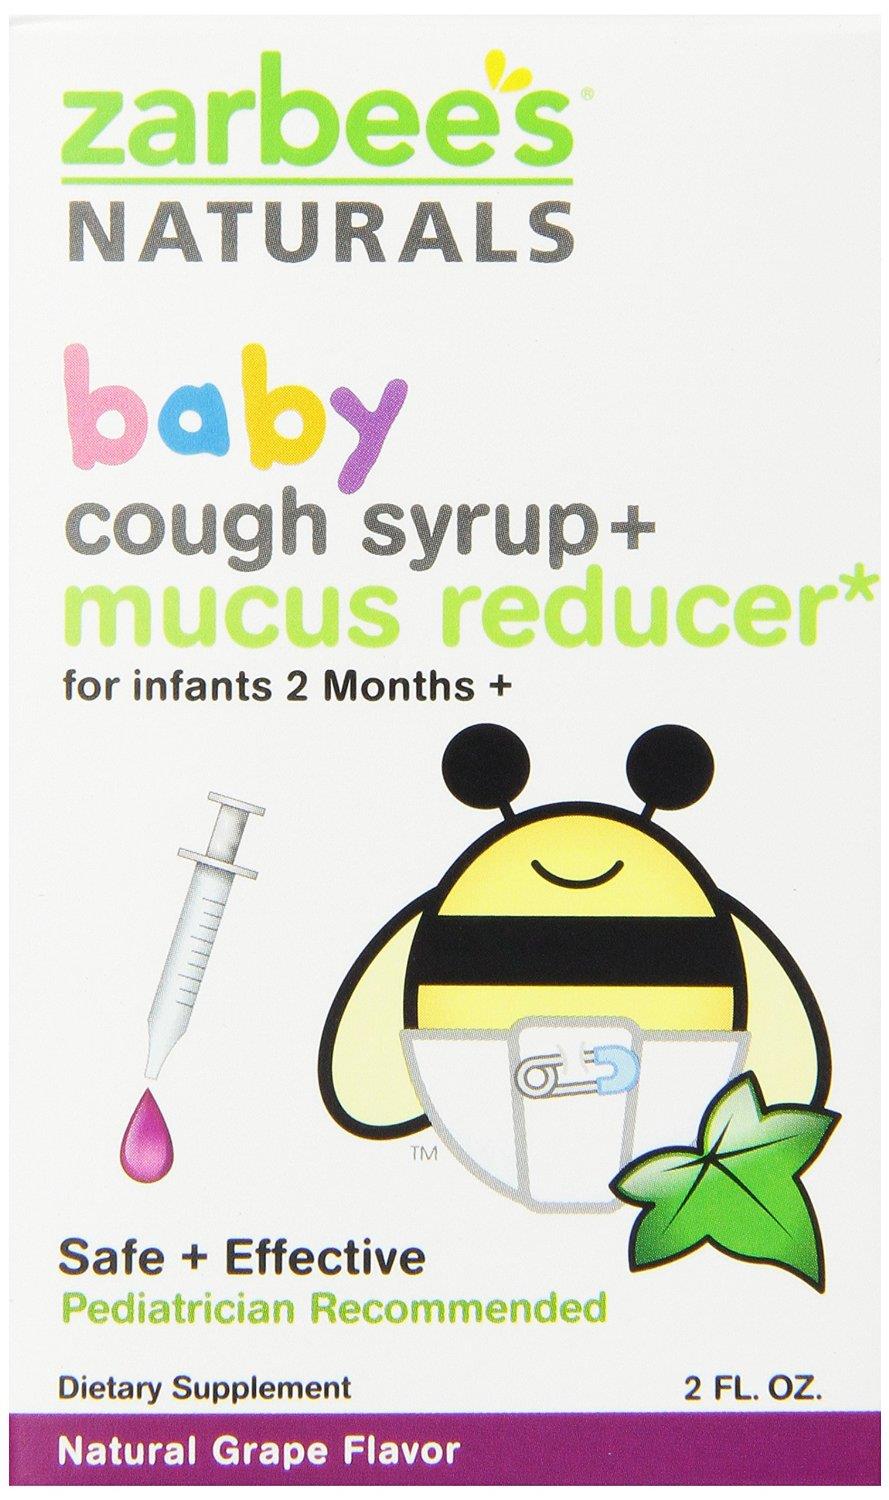 Zarbee’s Naturals Baby Cough Syrup + Mucus Reducer Only $2.49 at Target